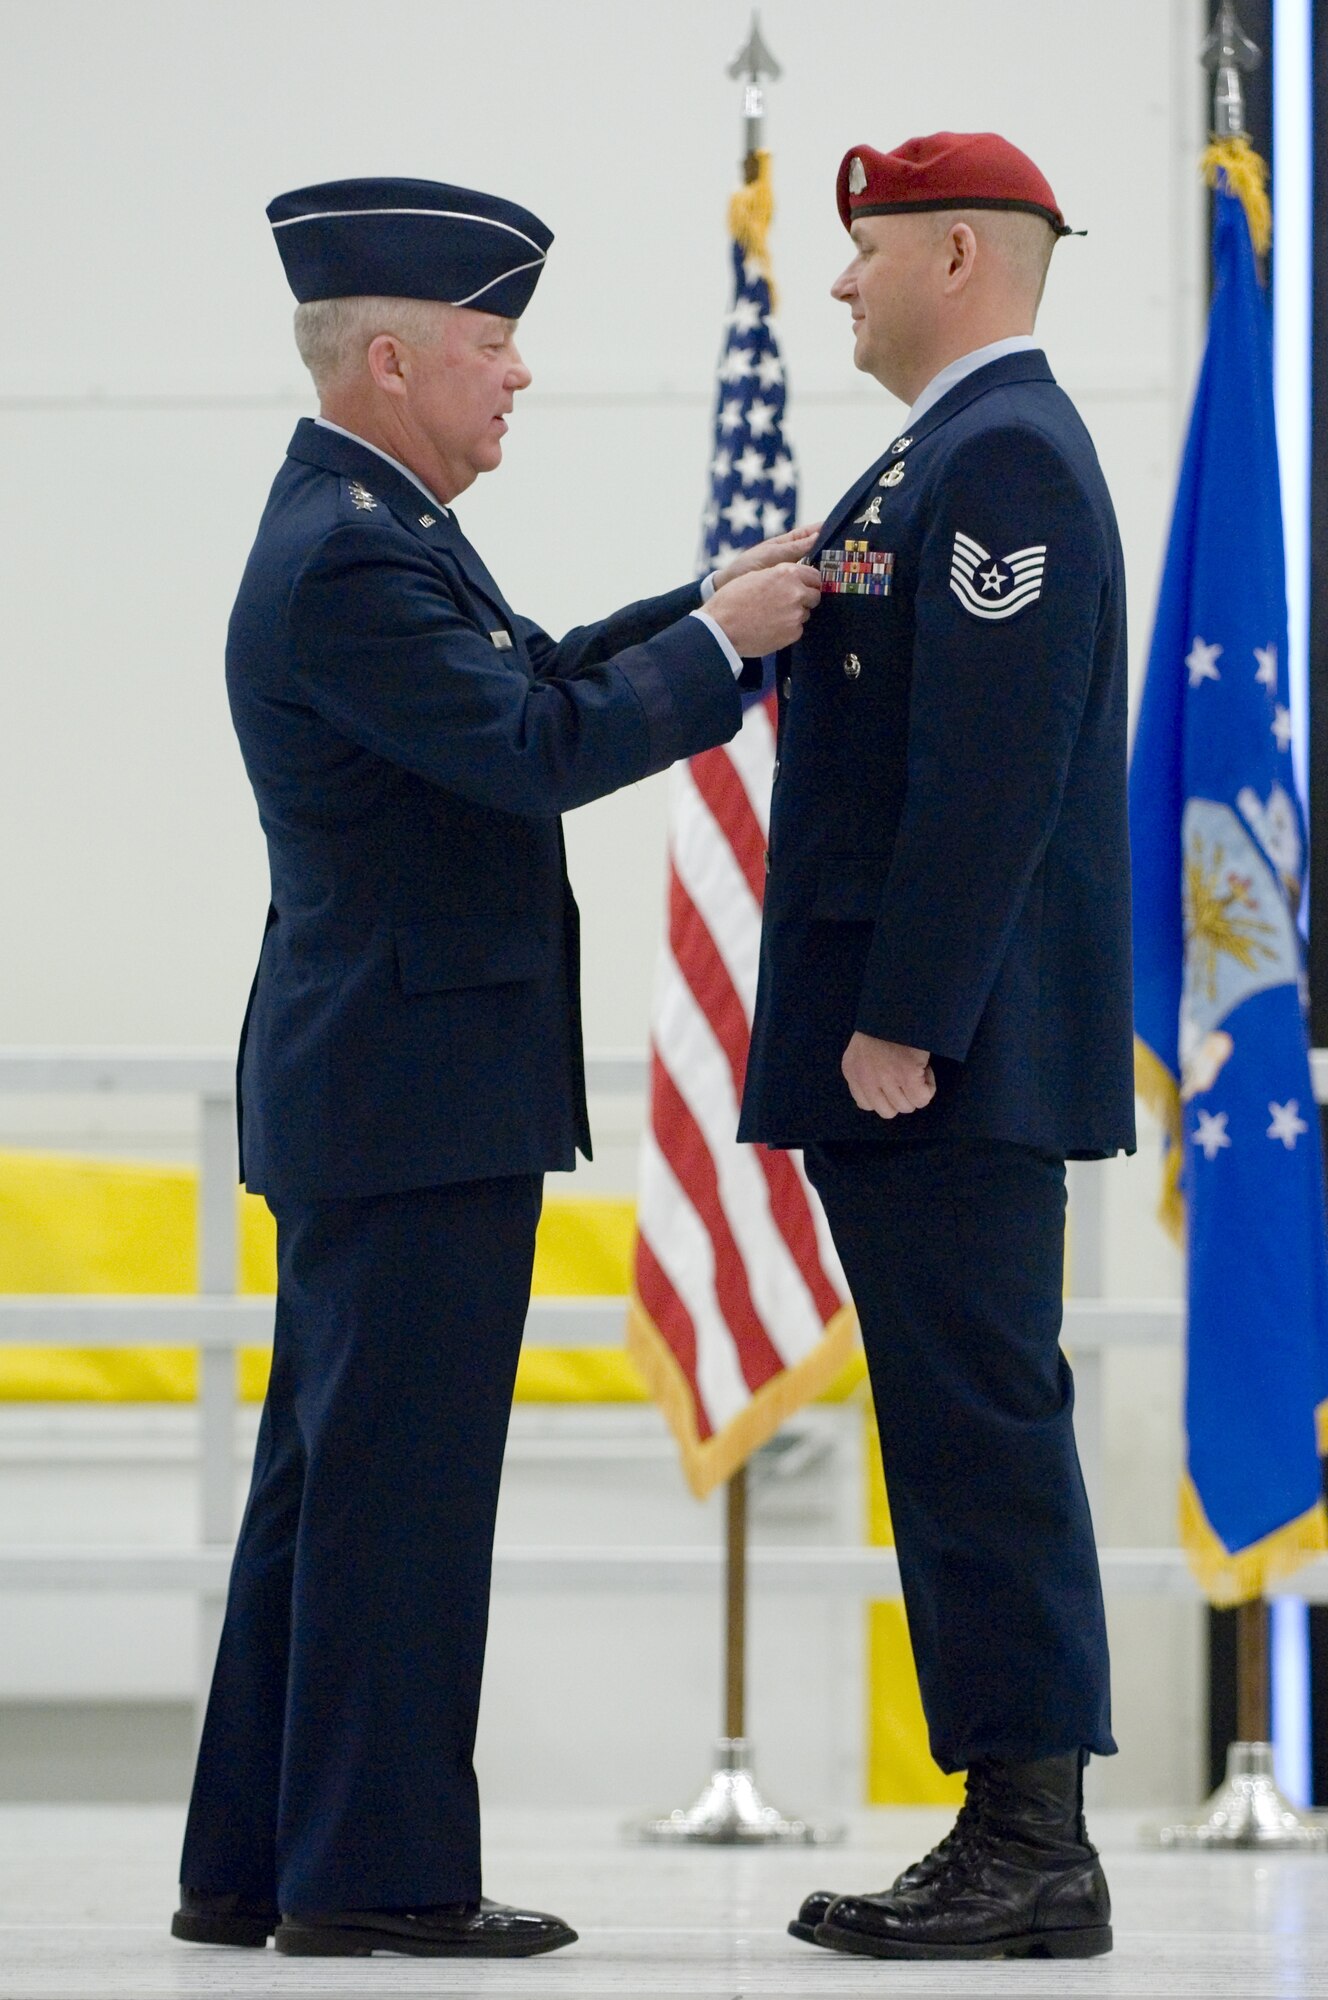 Lt. Gen. Donny Wurster, Air Force Special Operations Command commander, pins the Silver Star on Tech. Sgt. Scott Innis, 22nd Special Tactics Squadron, during a medal ceremony at McChord Air Force Base, Wa., Dec. 18. The Silver Star, the nation's third highest decoration for valor, was presented first to Sergeant Innis for his actions during a firefight with enemy forces in Afghanistan during spring 2006. Sergeant Innis also received a Bronze Star with valor and an Air Force Combat Action Medal for his actions during his unit's 2007 deployment to Southwest Asia. (U.S. Air Force photo/Abner Guzman)